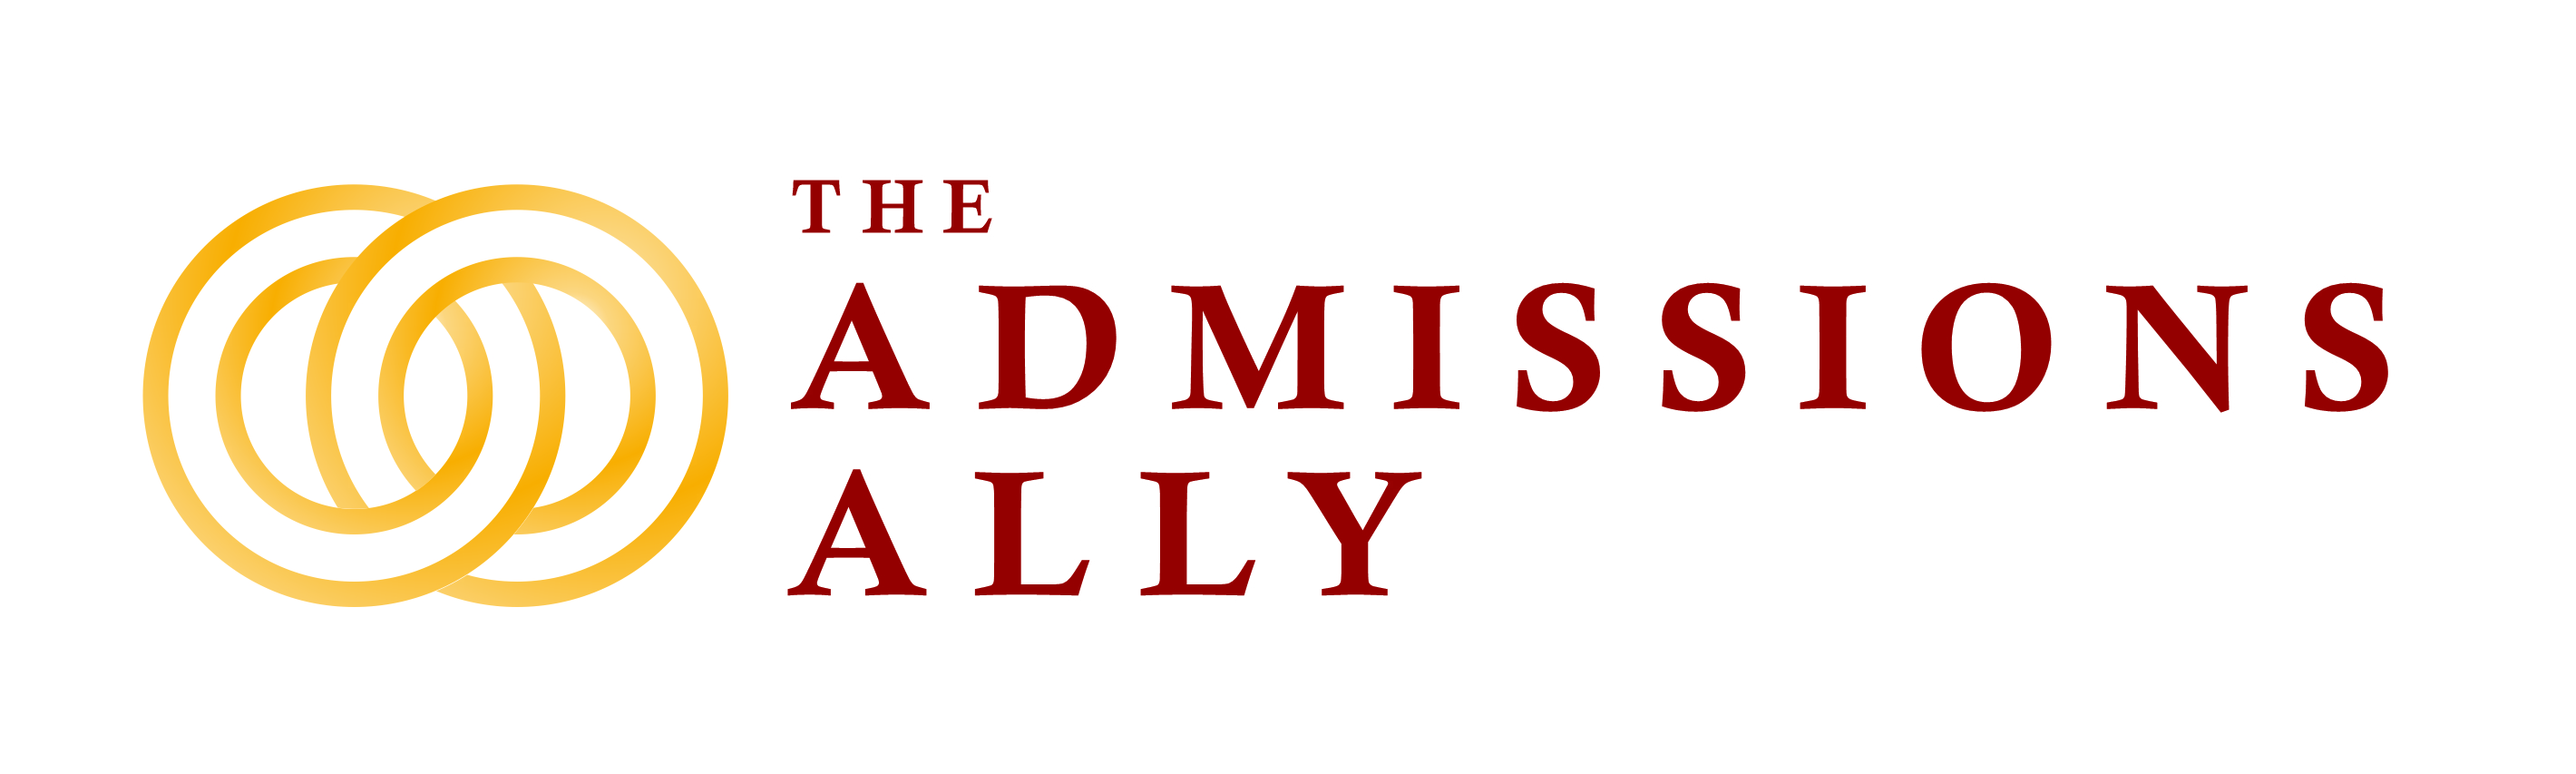 The Admissions Ally